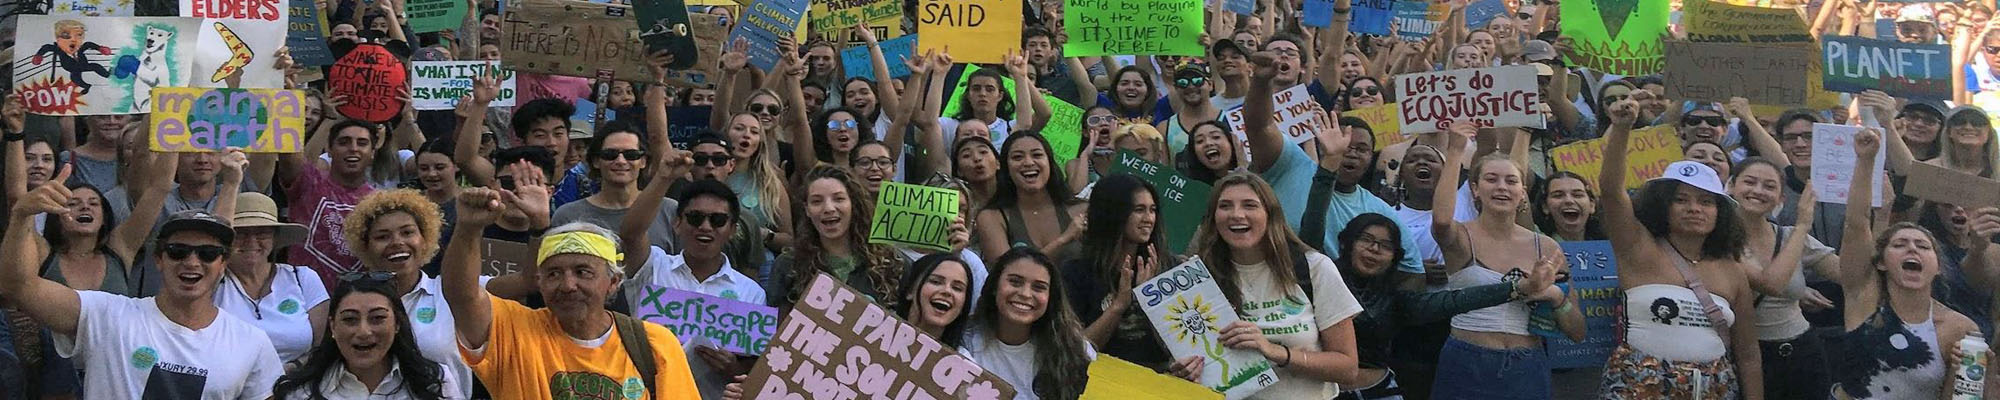 SDSU students at climate change protest